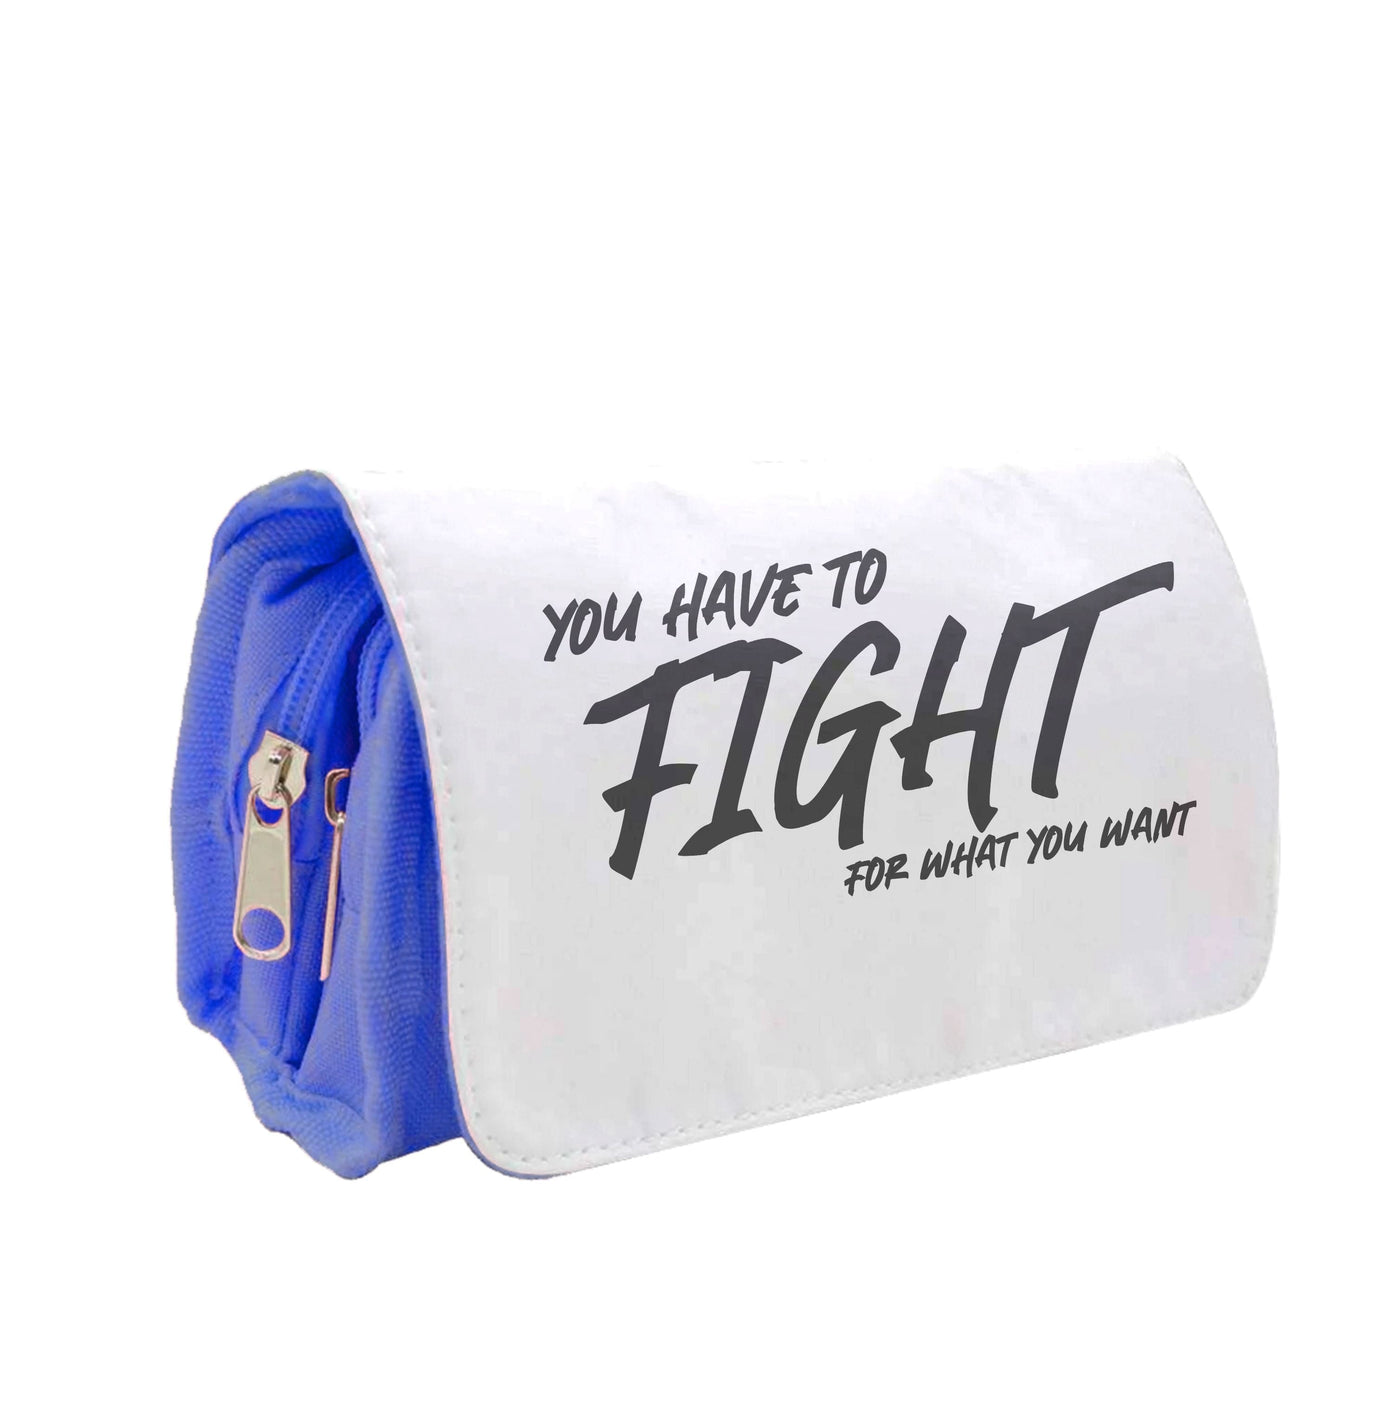 You Have To Fight - Top Boy Pencil Case